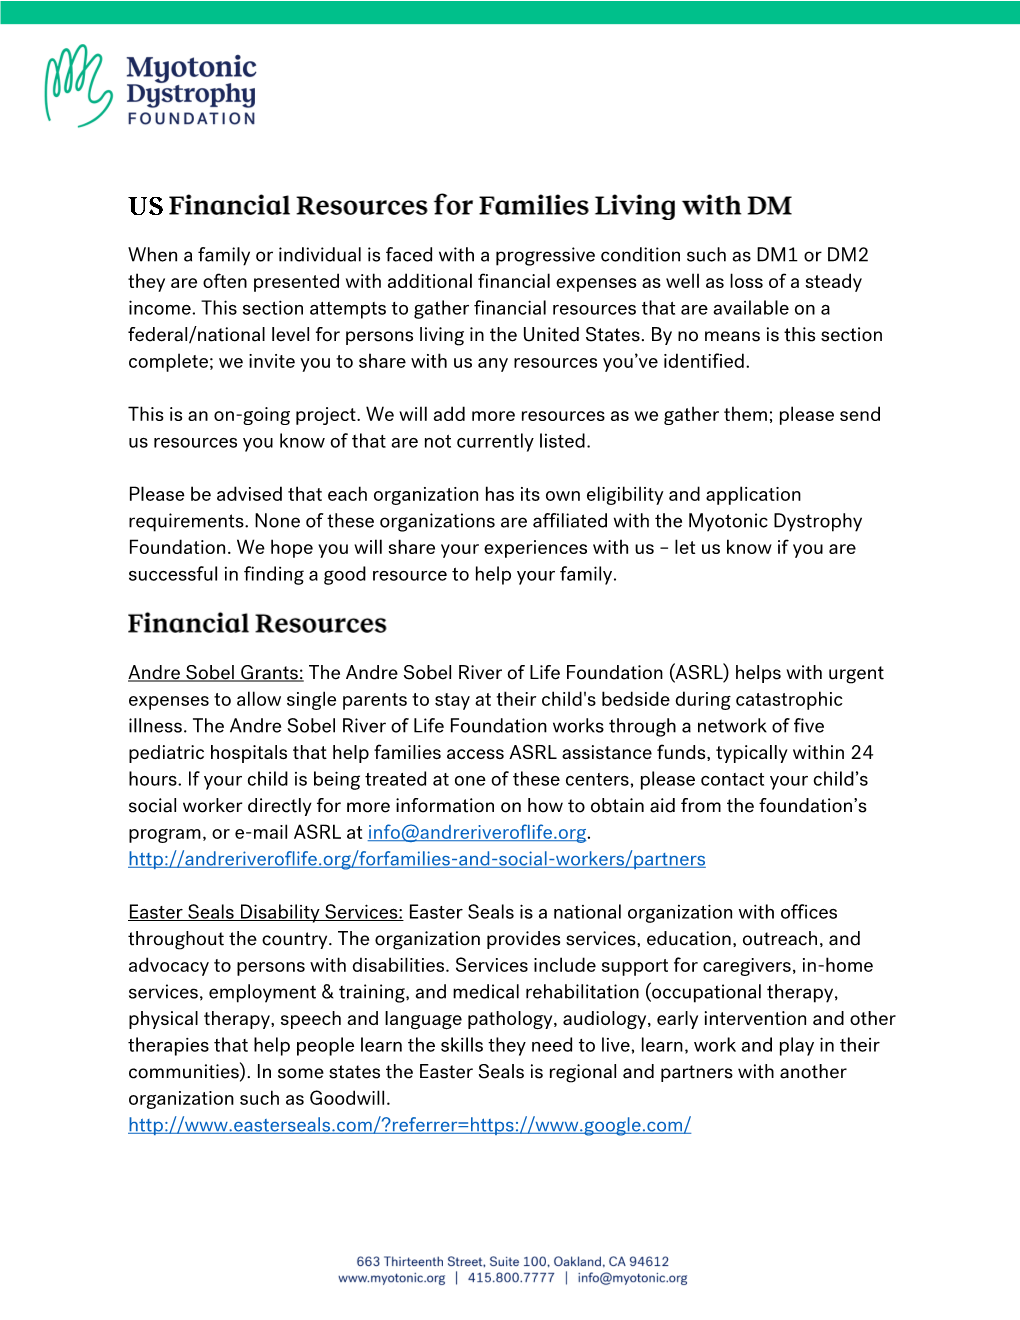 National Financial Resources List